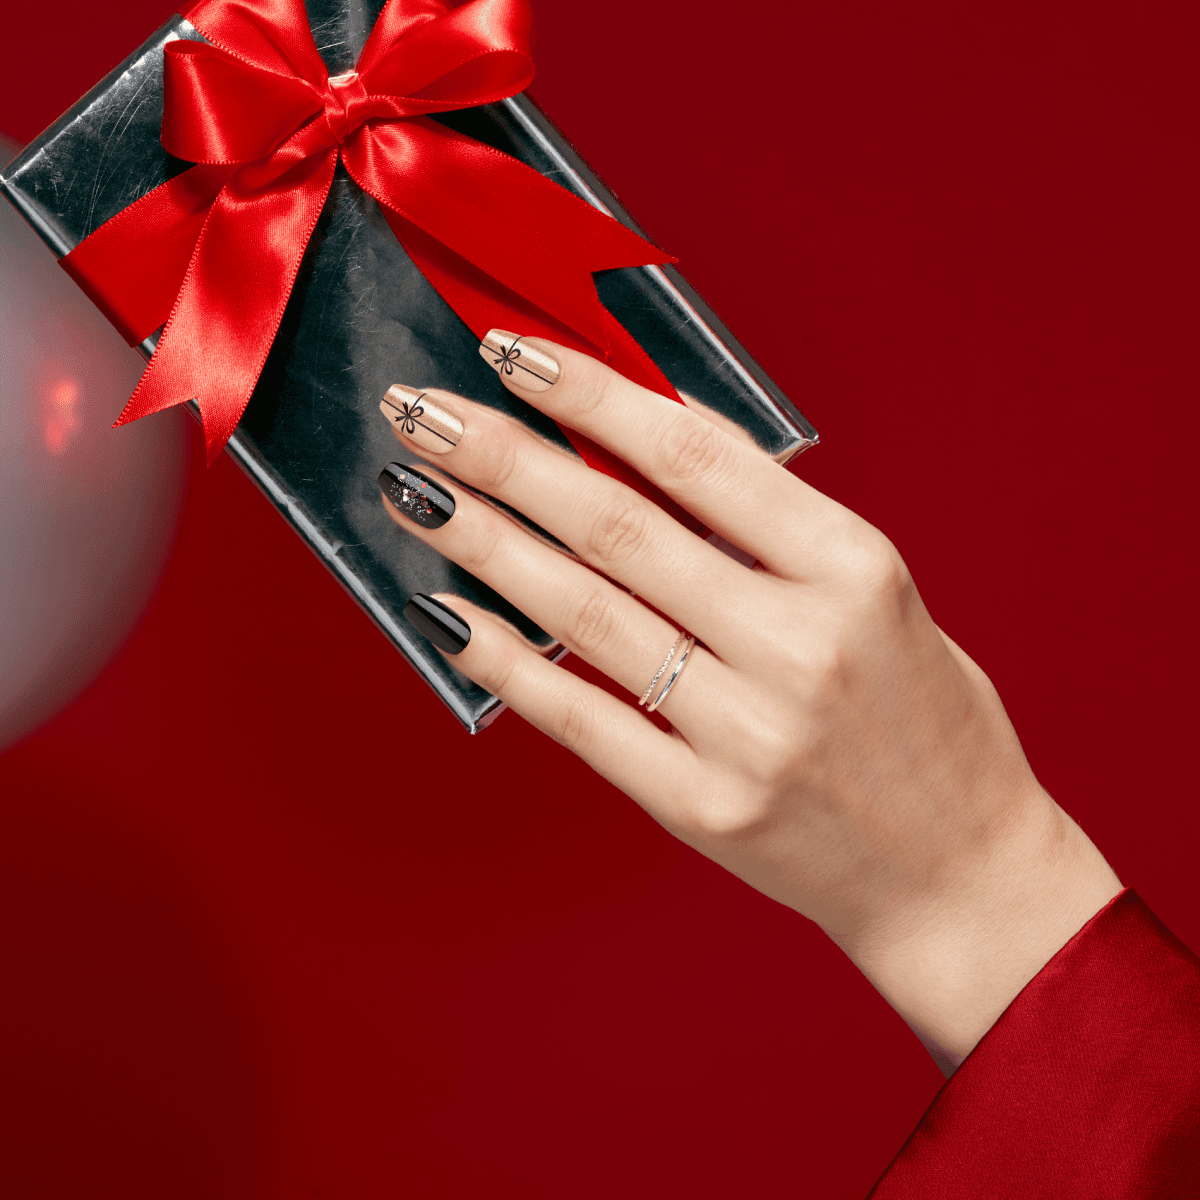 imPRESS Limited-Edition Holiday Press-On Nails - Naughty or Nice